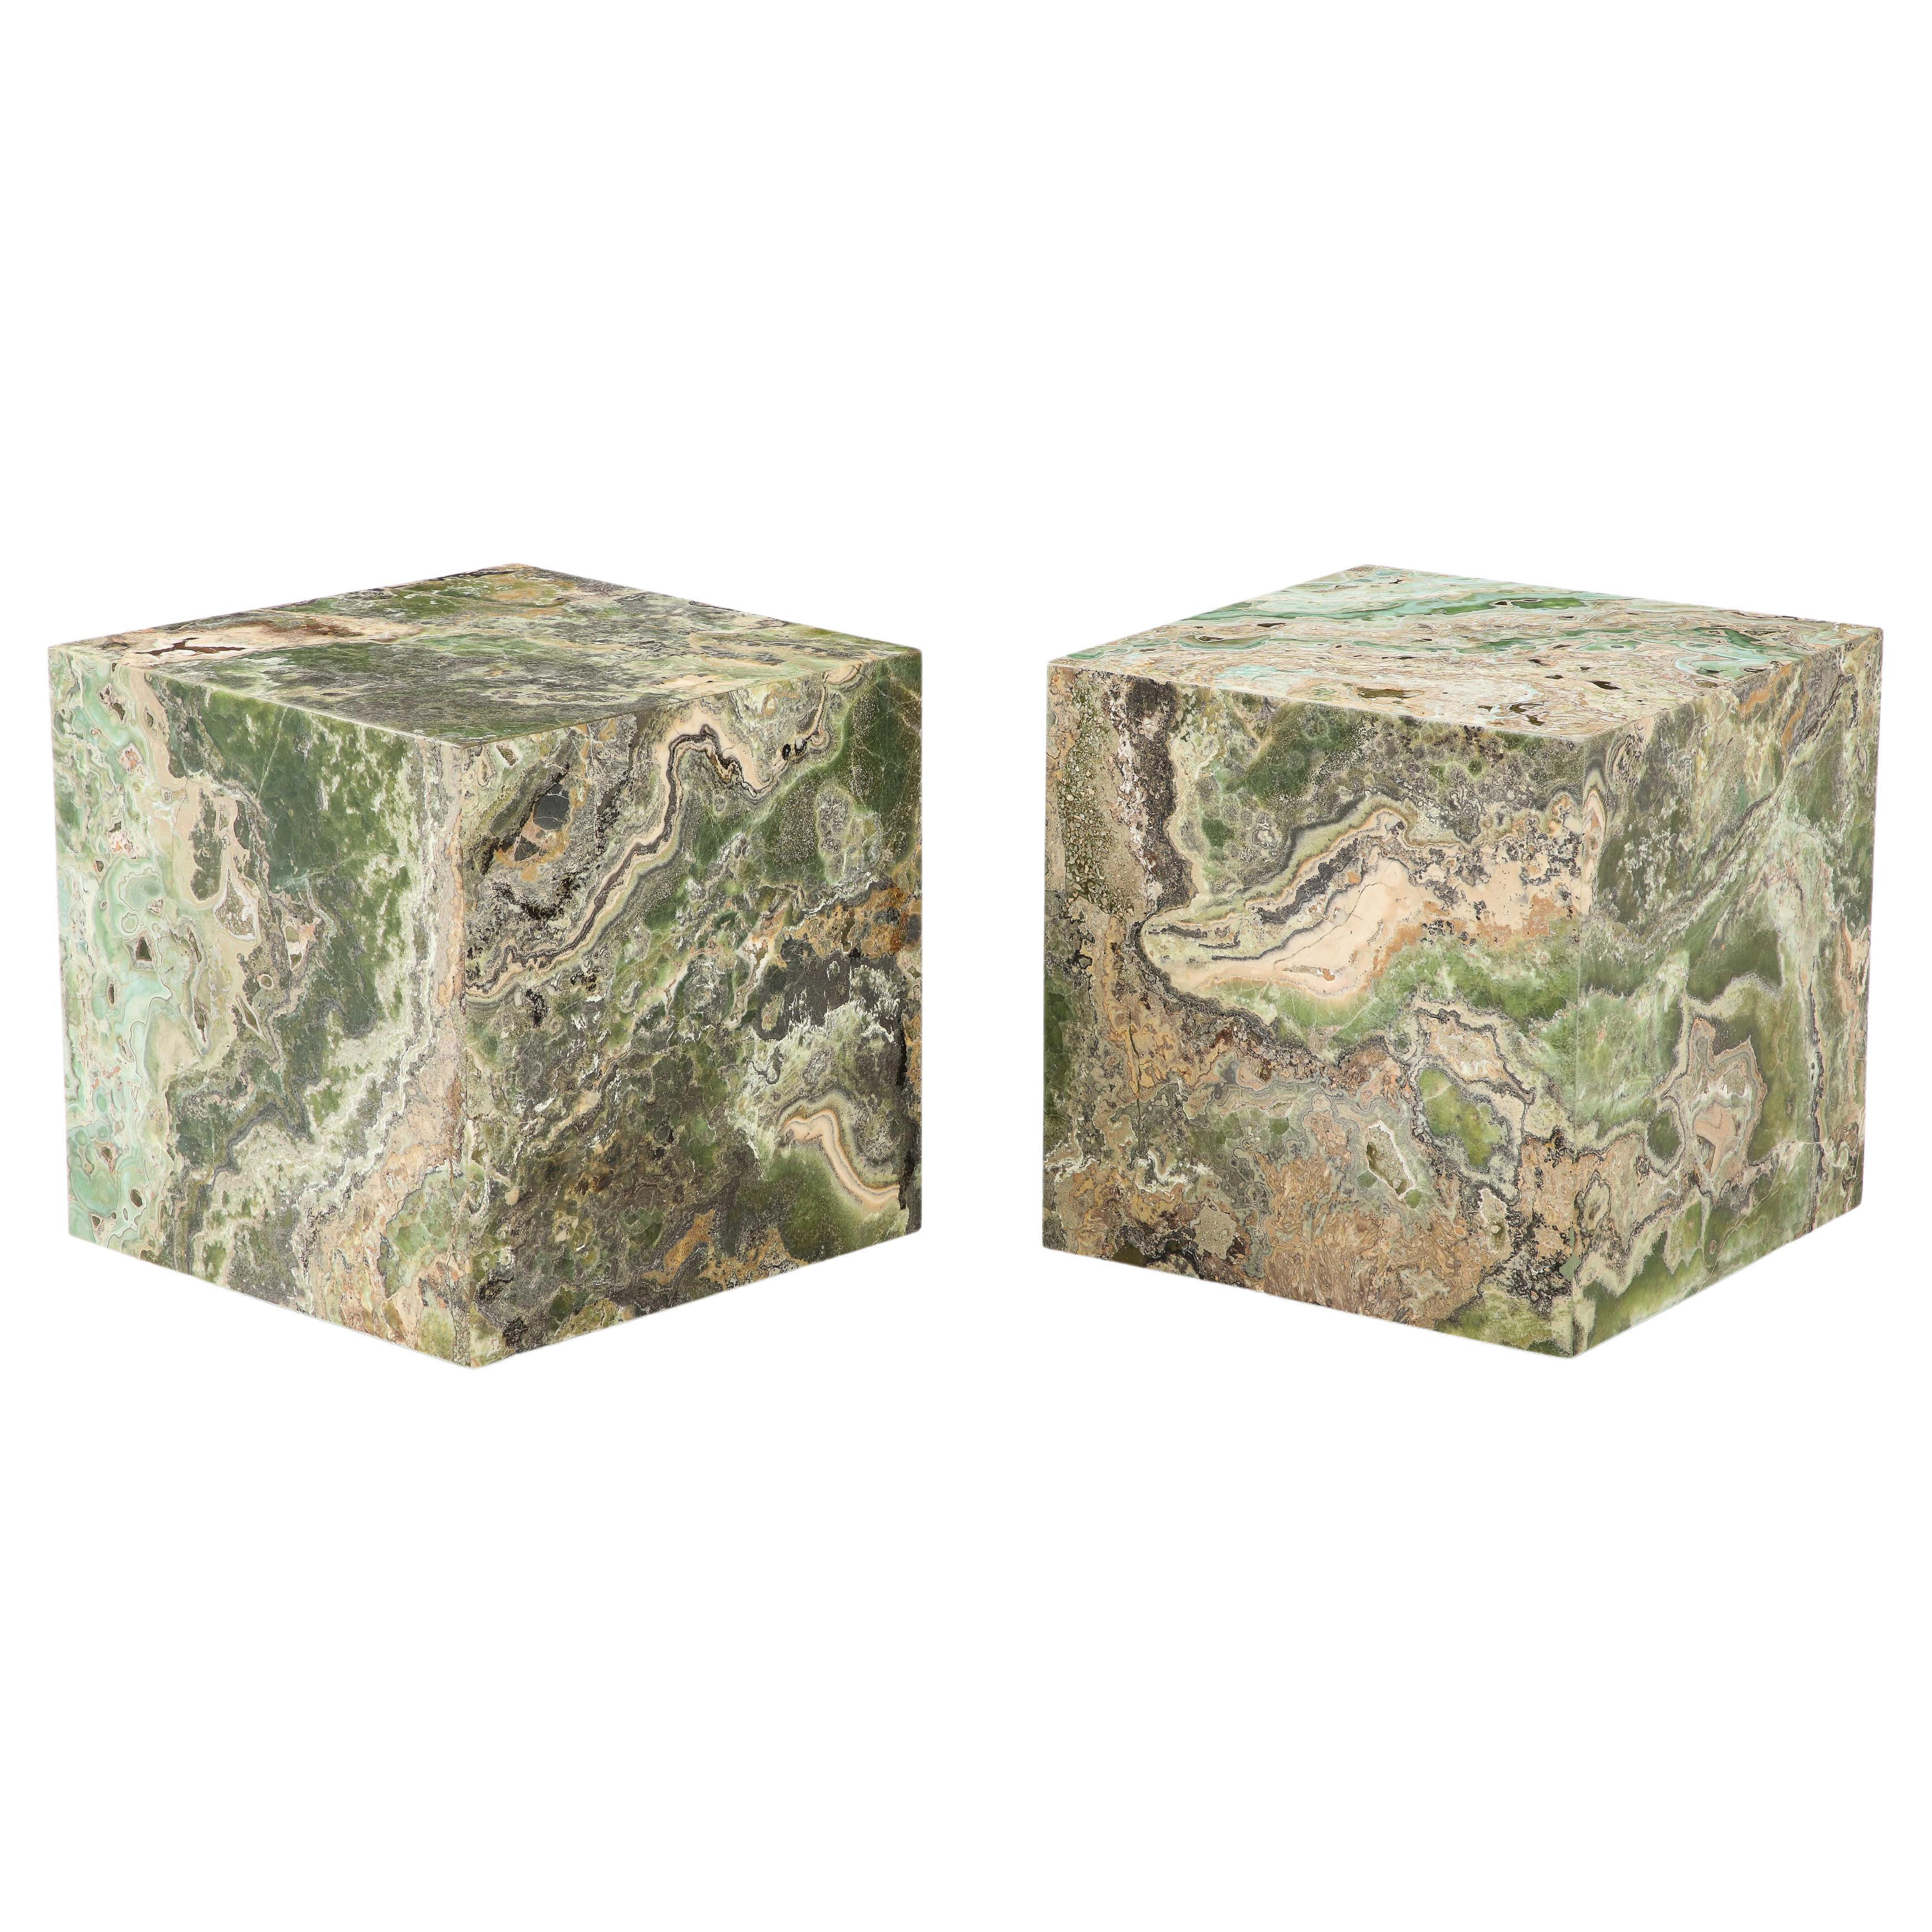 Pair of Spectacular Honed Onyx Cube Tables